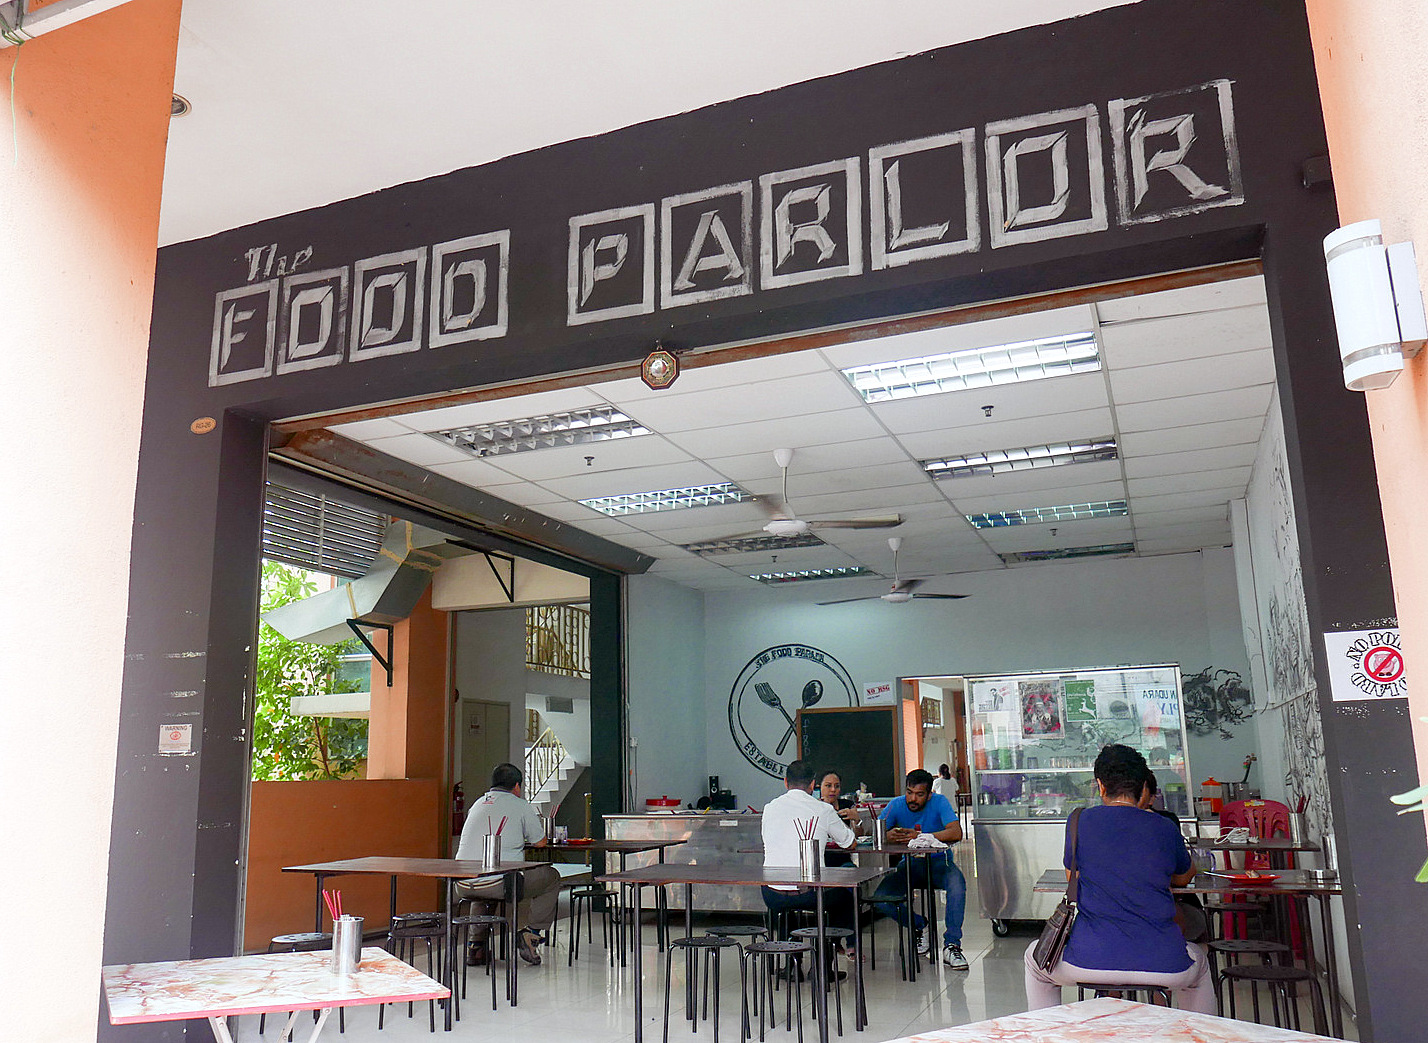 1. The Food Parlor